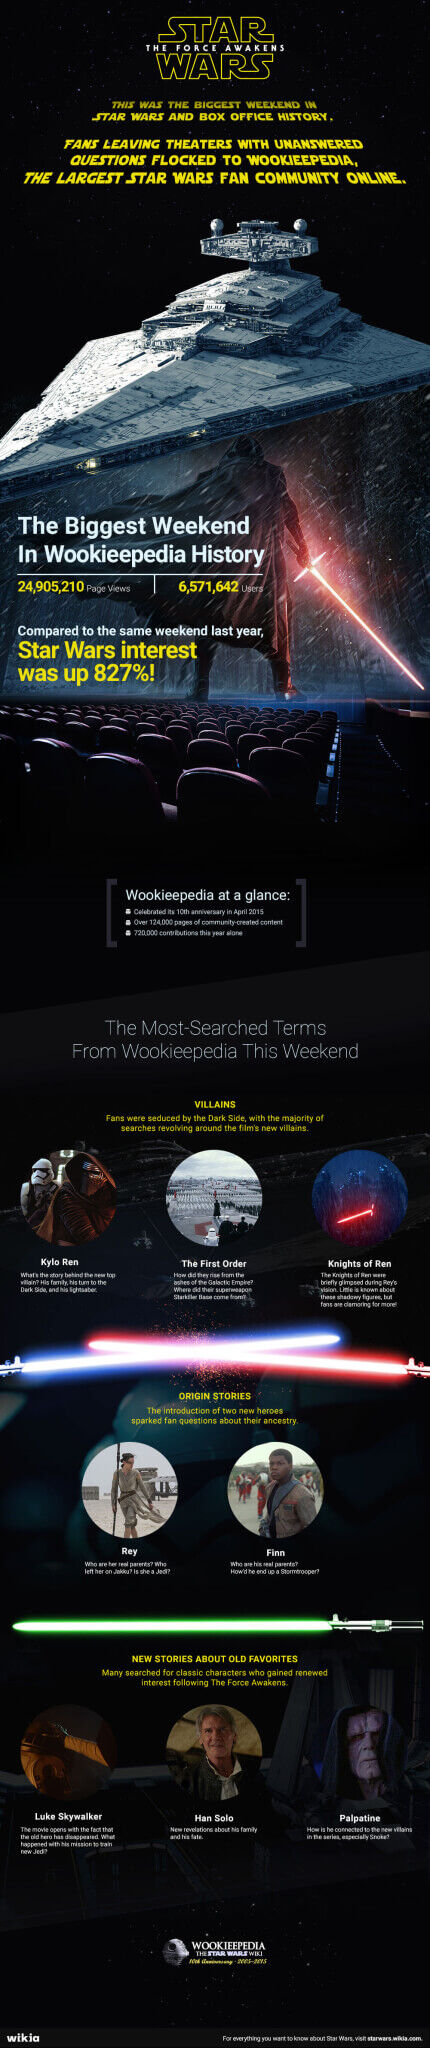 Star_Wars_Weekend_Infographic_R1-4a